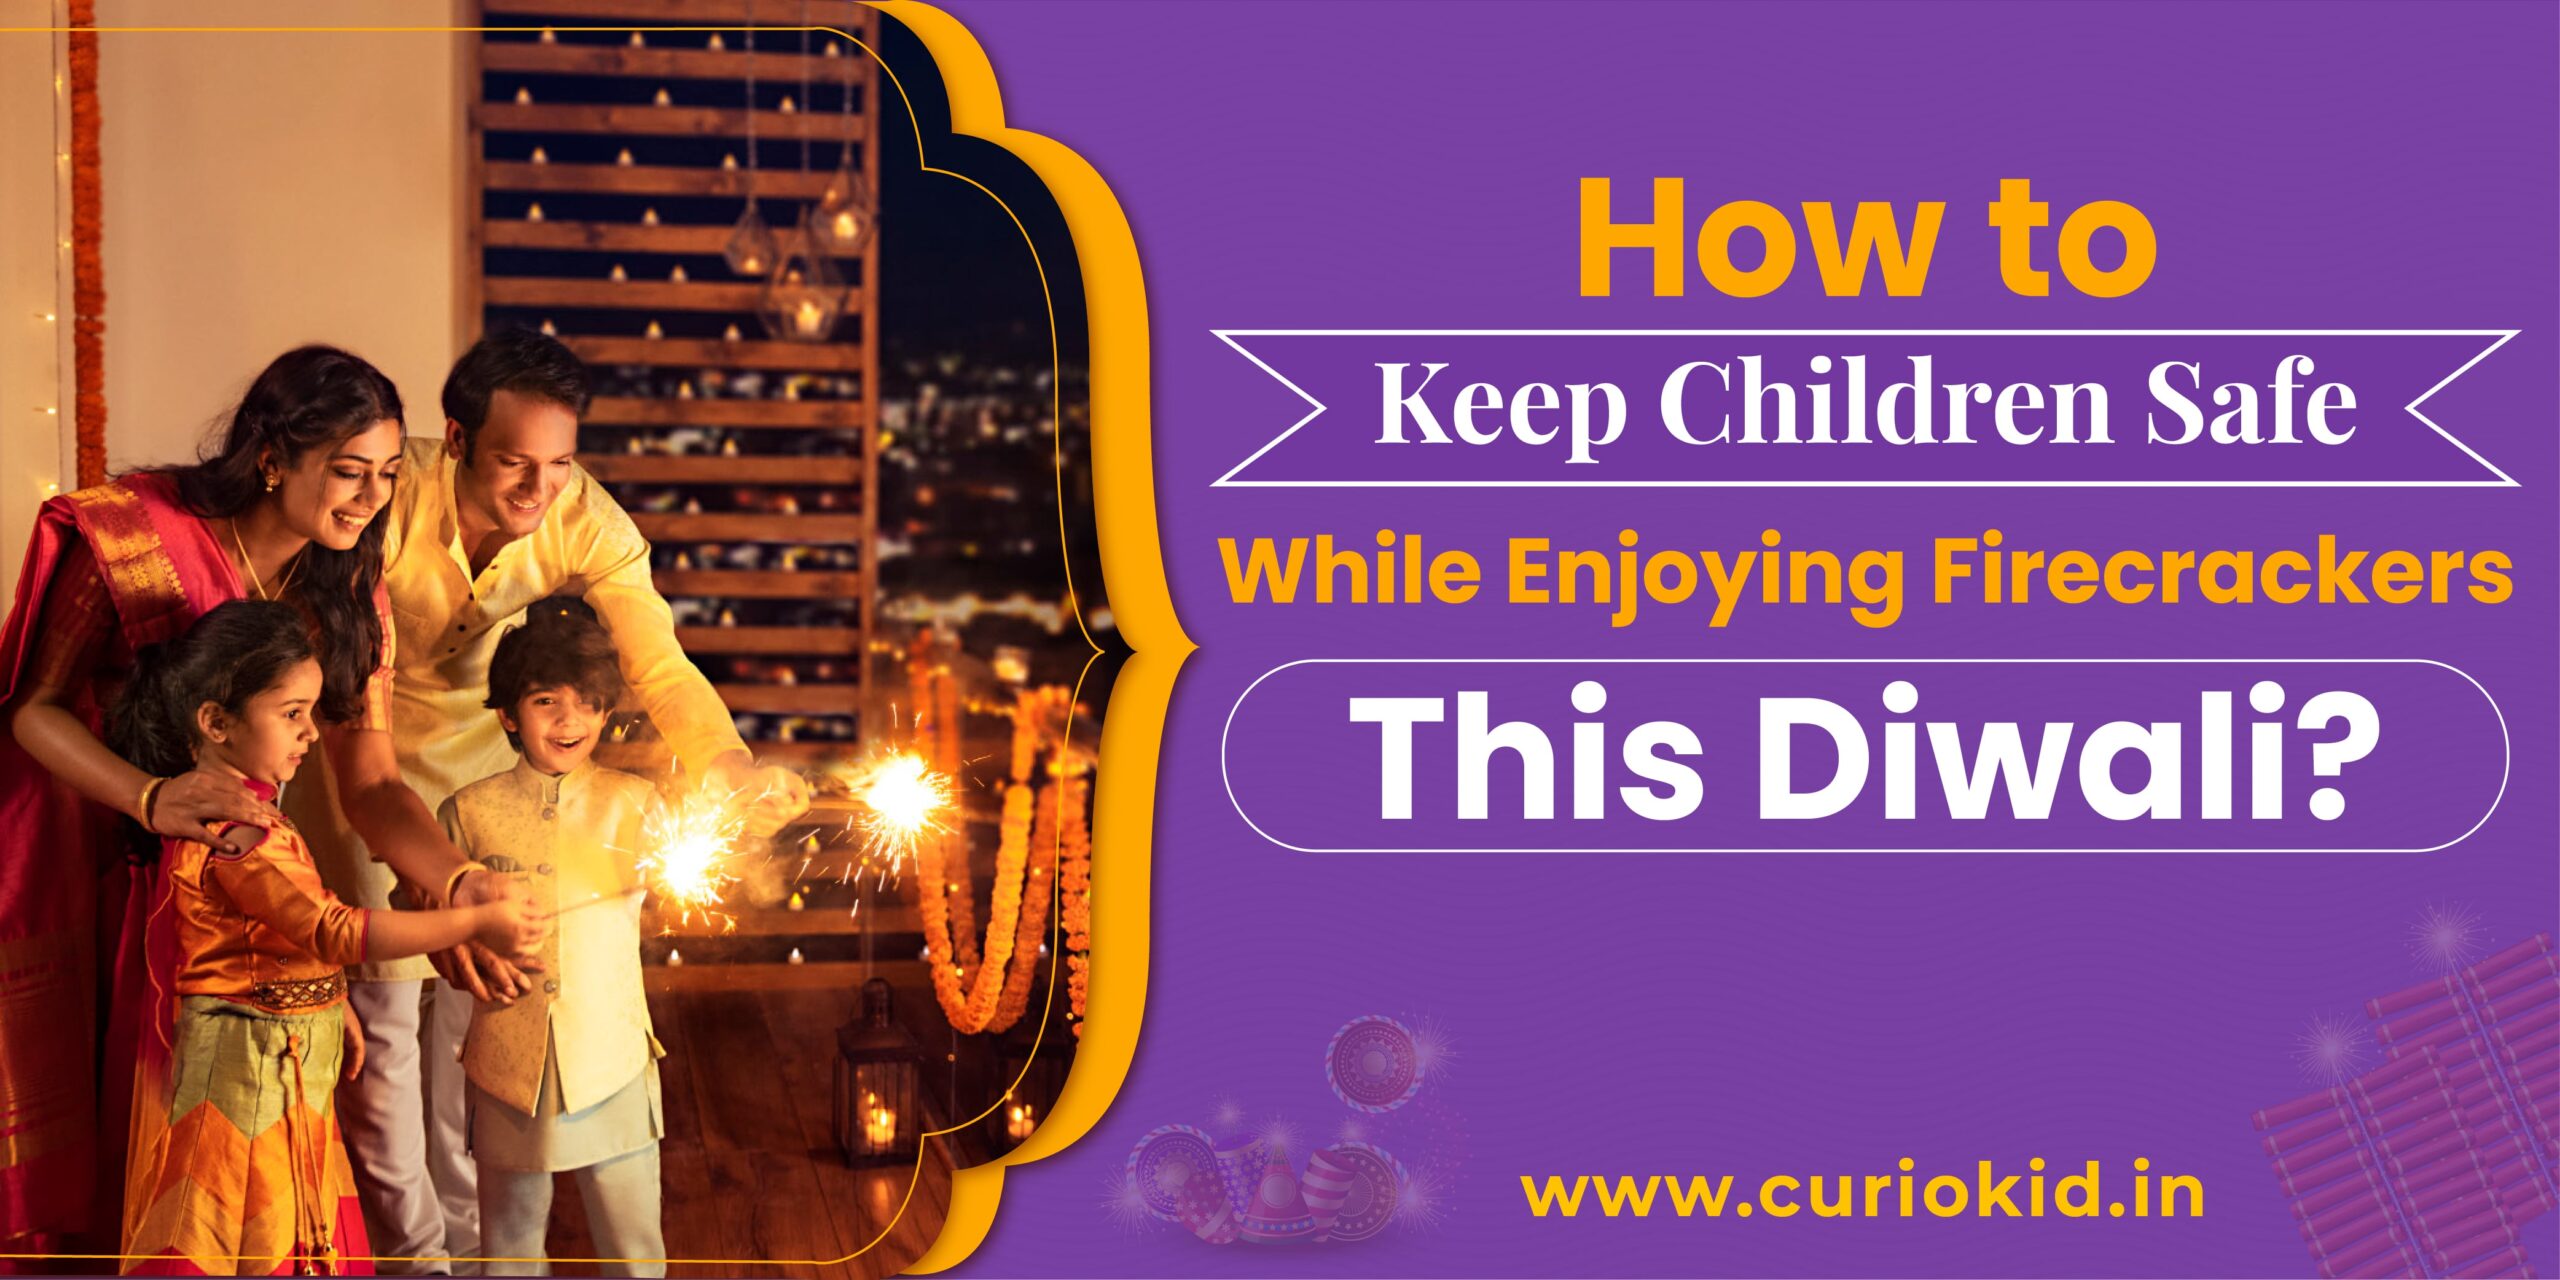 How to Keep Children Safe While Enjoying Firecrackers This Diwali?